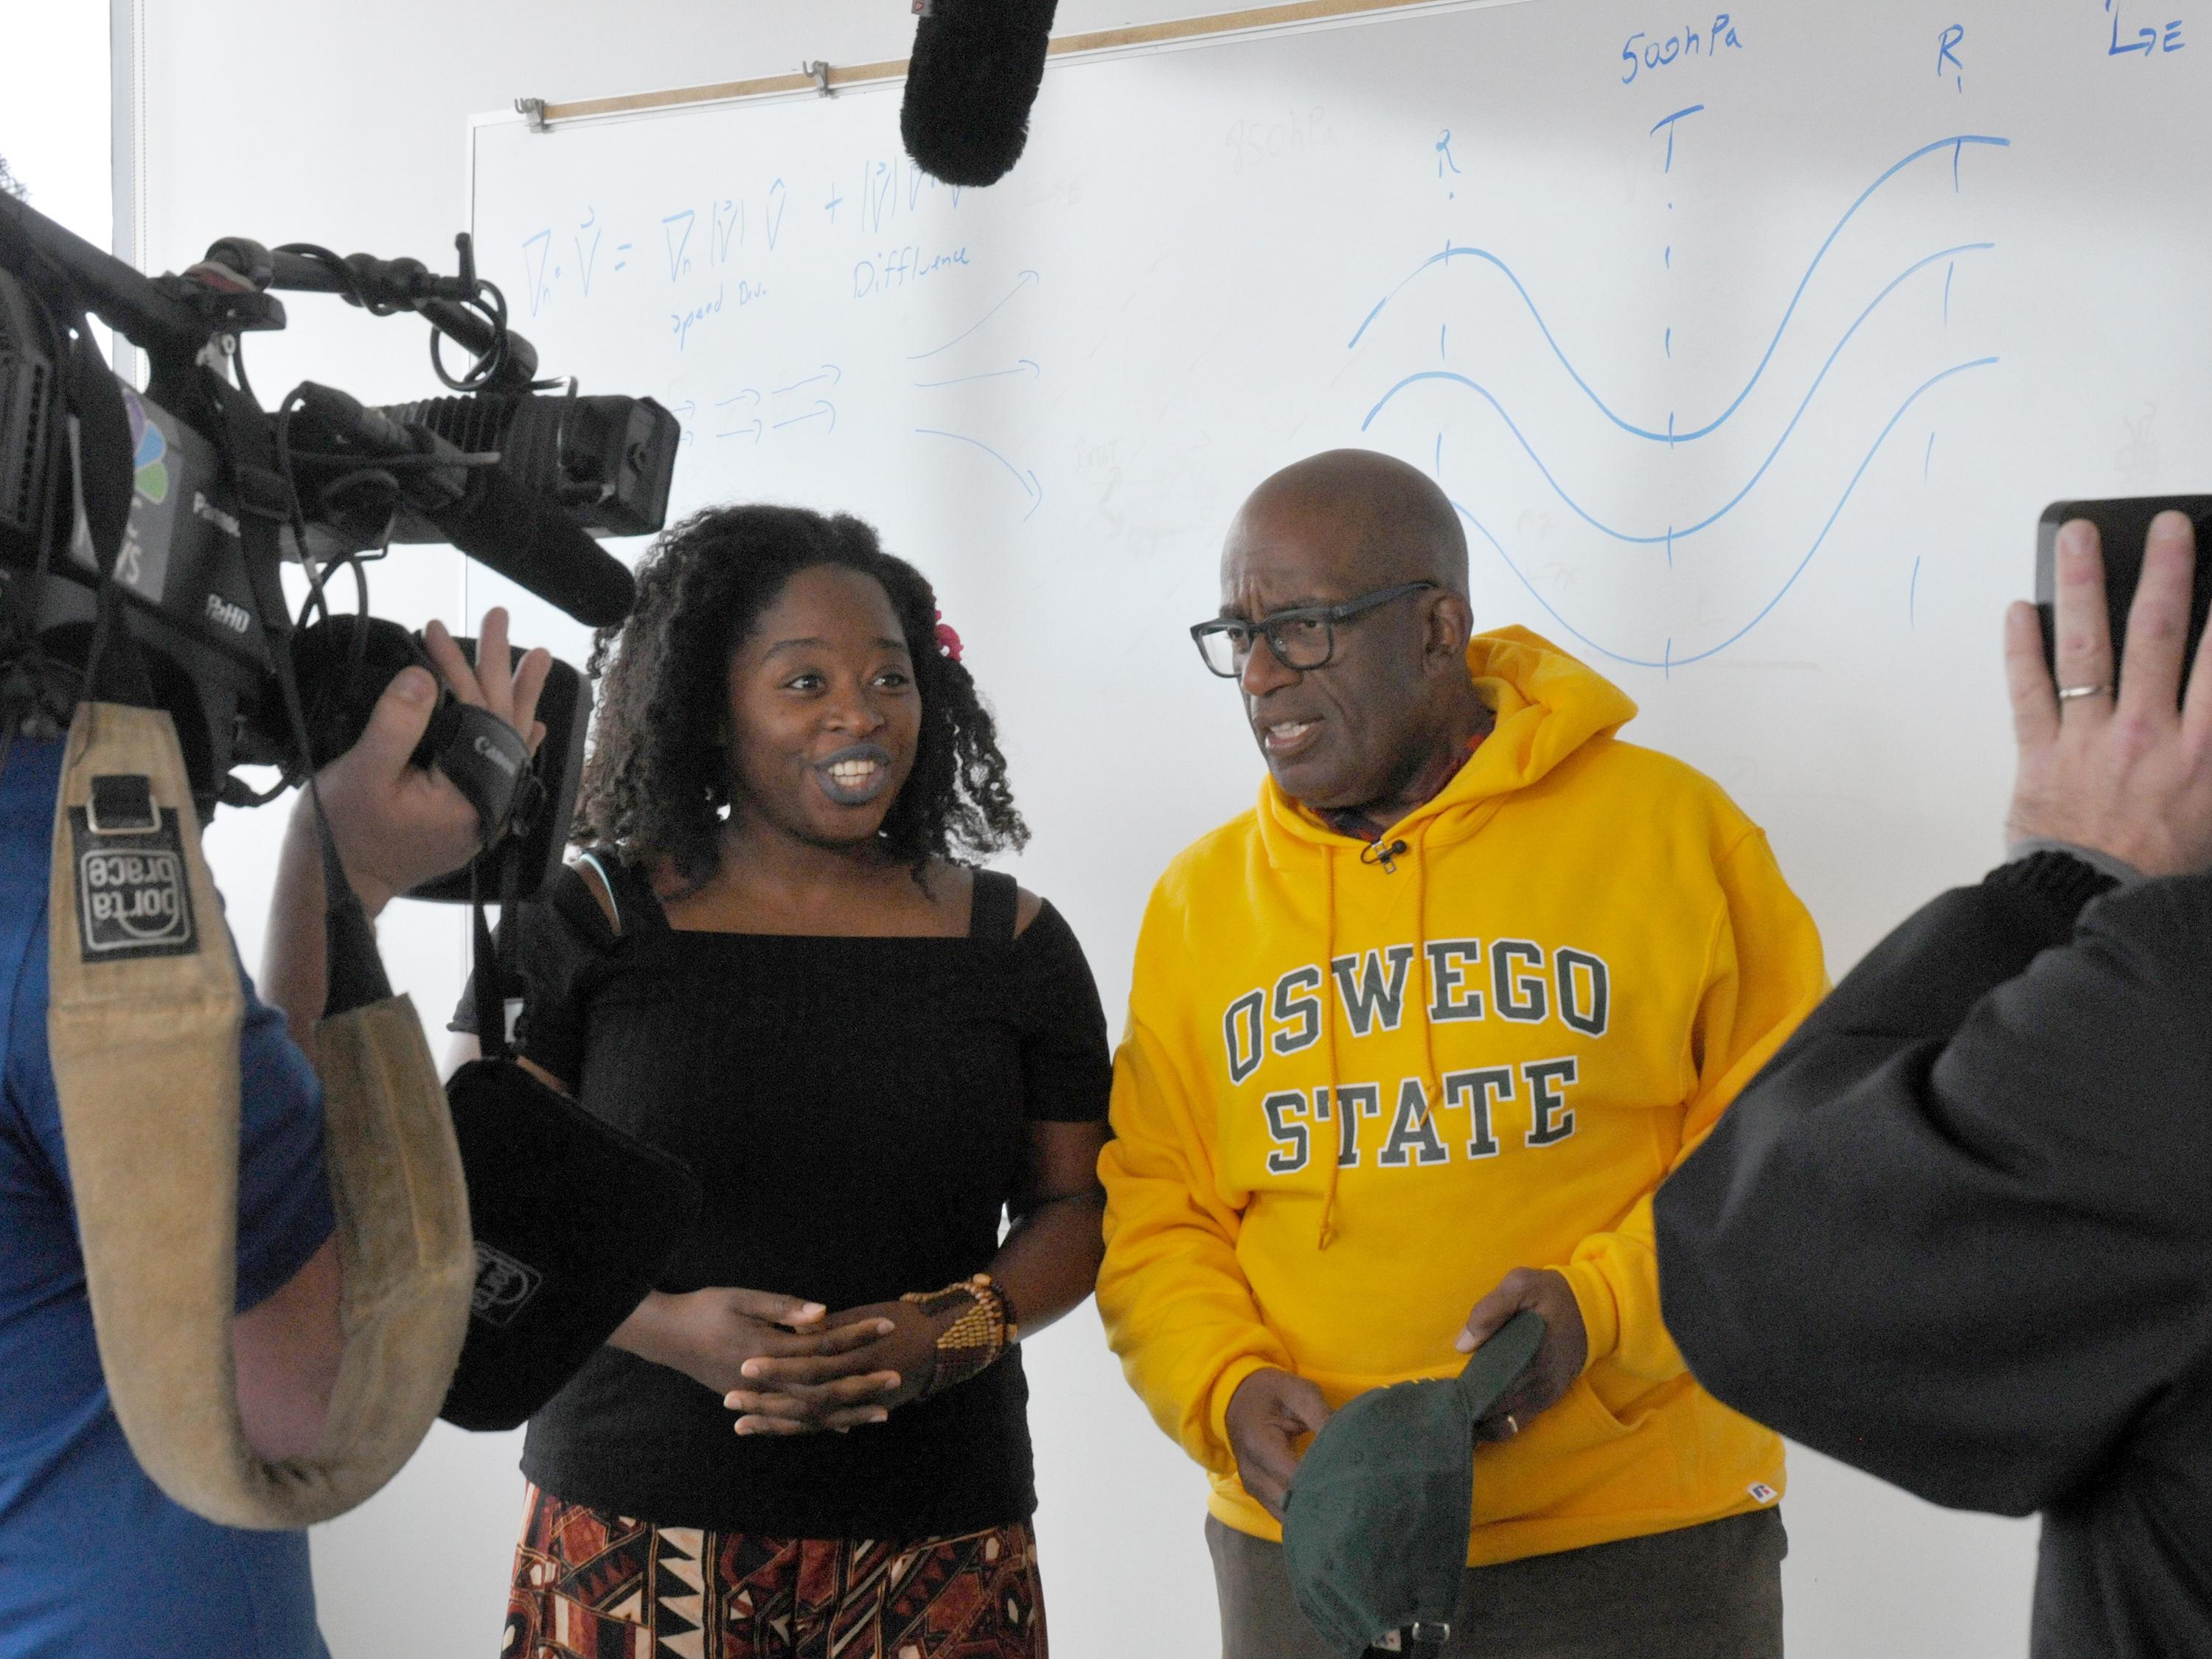 Al Roker visits a meteorology classroom at SUNY Oswego during 2017 Rokerthon